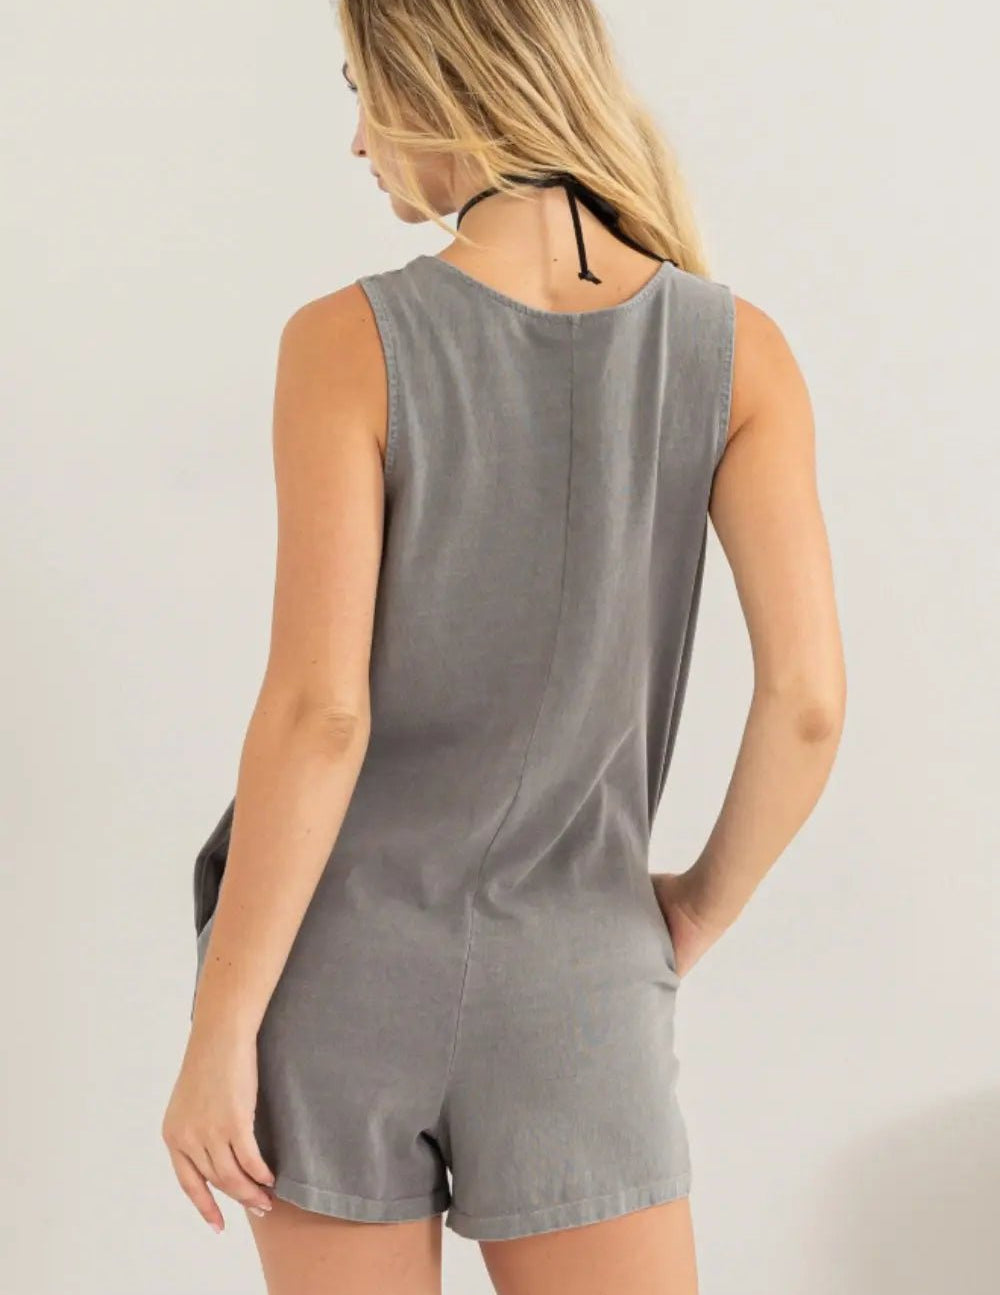 LOOSE BAGGY OVERSIZED CASUAL ROMPER - MeadeuxLOOSE BAGGY OVERSIZED CASUAL ROMPERJumpsuitMeadeux